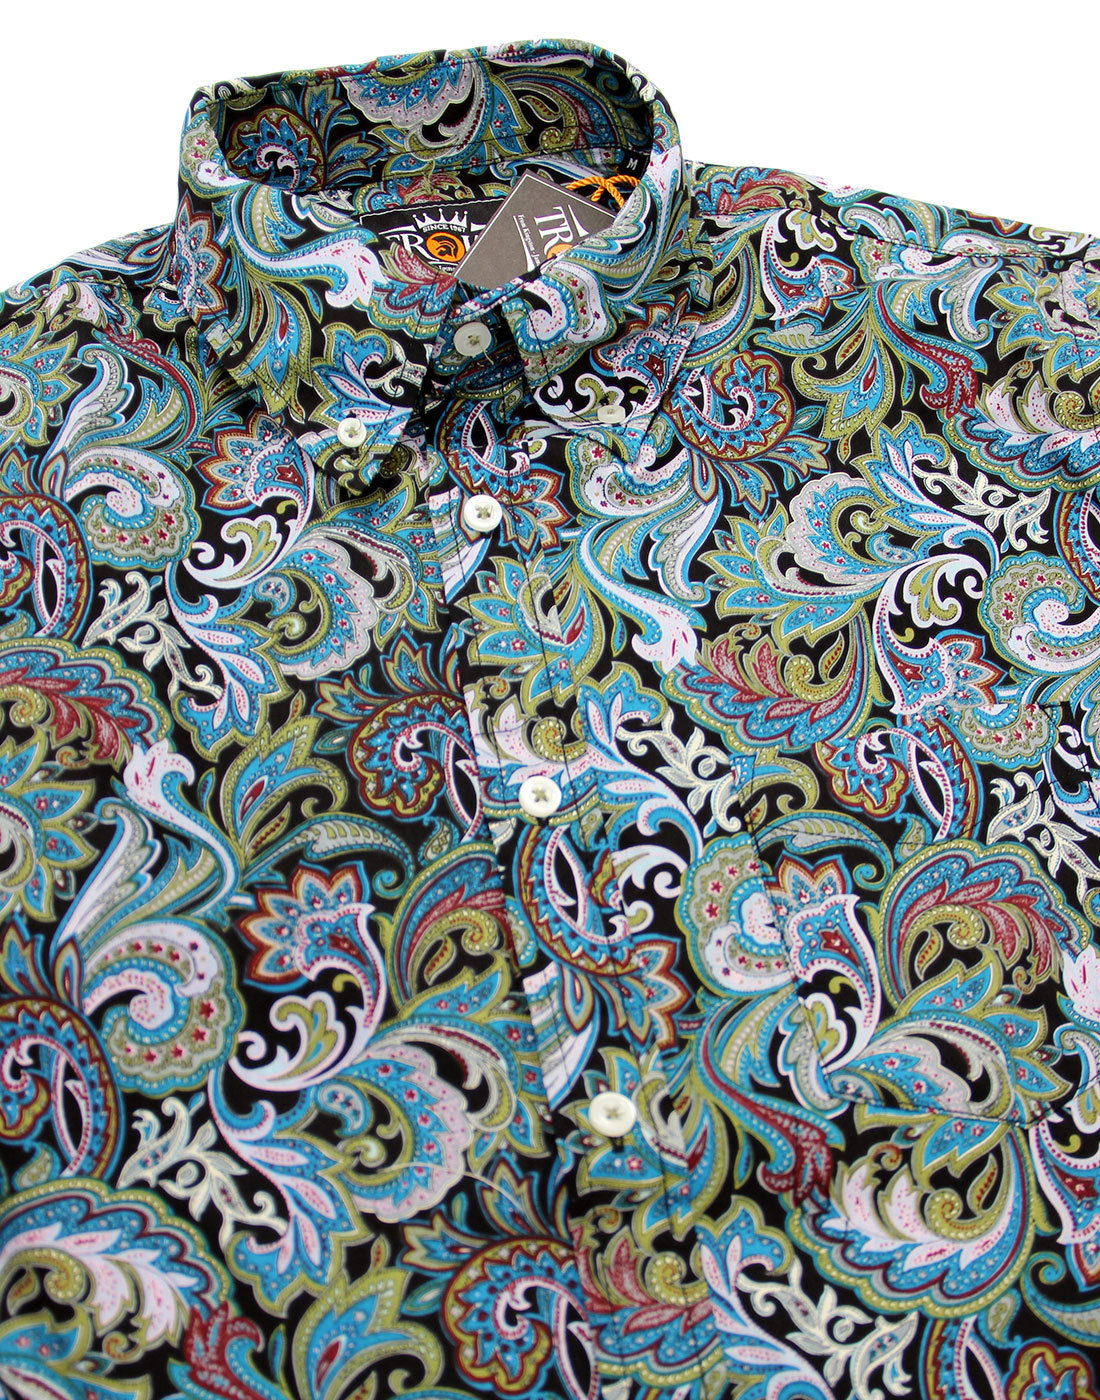 TROJAN RECORDS 60s Mod Psychedelic Floral Paisley Shirt in Black